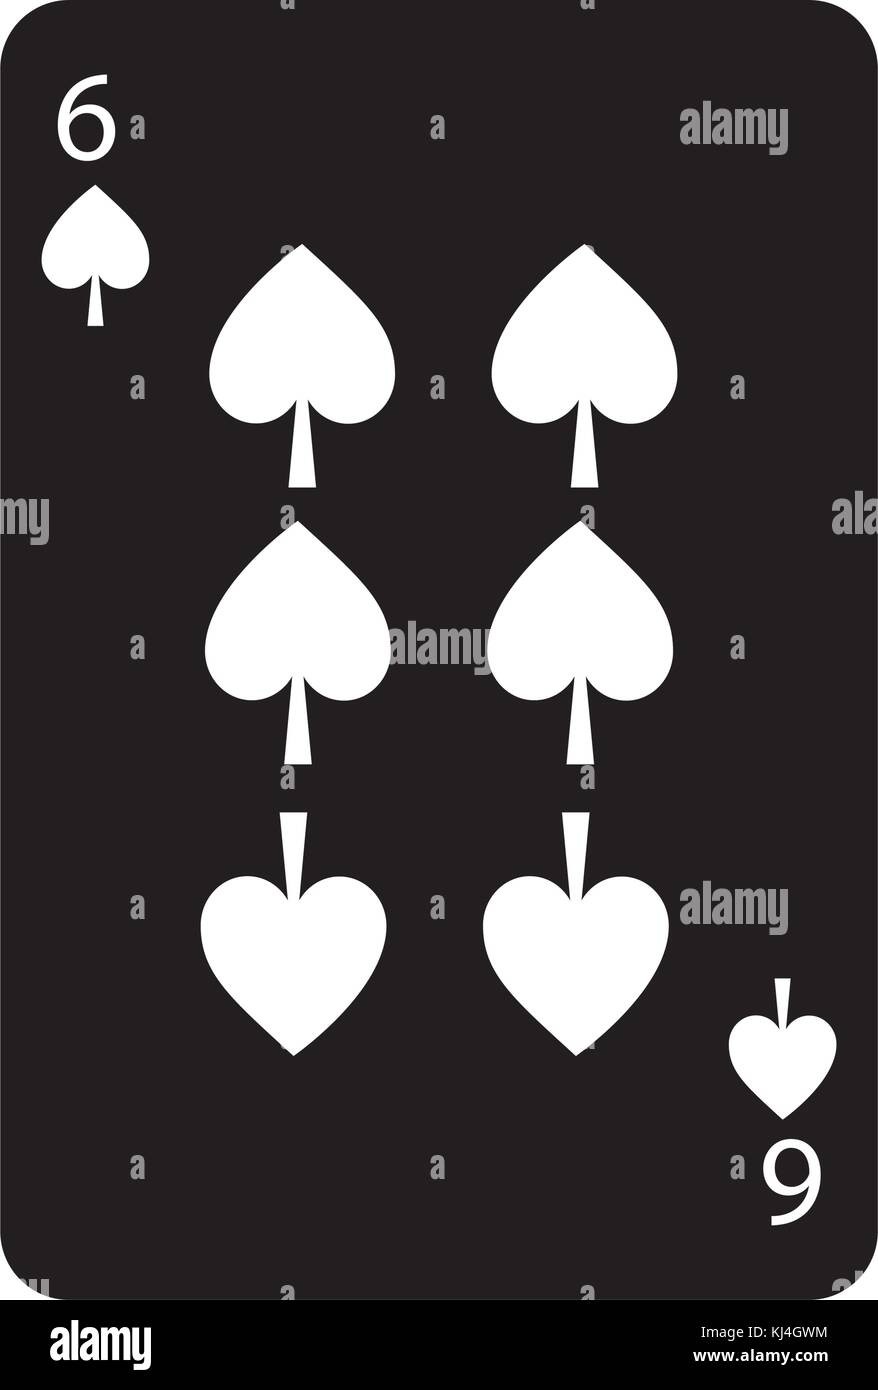 six of spades french playing cards related icon icon image  Stock Vector